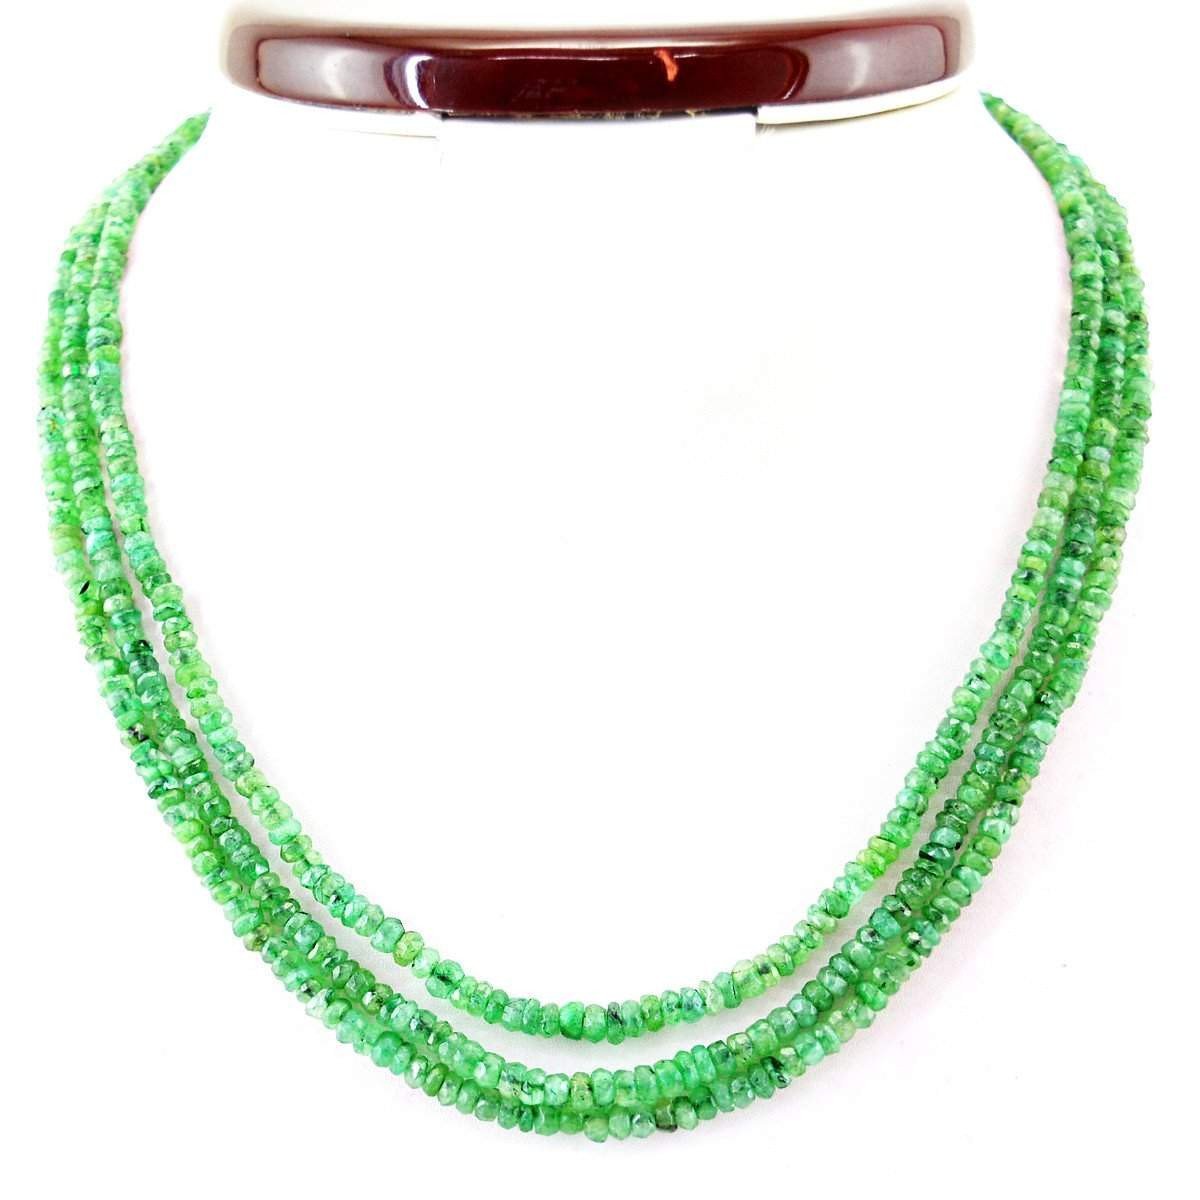 gemsmore:Natural Untreated Green Emerald Necklace 3 Strand Round Cut Beads